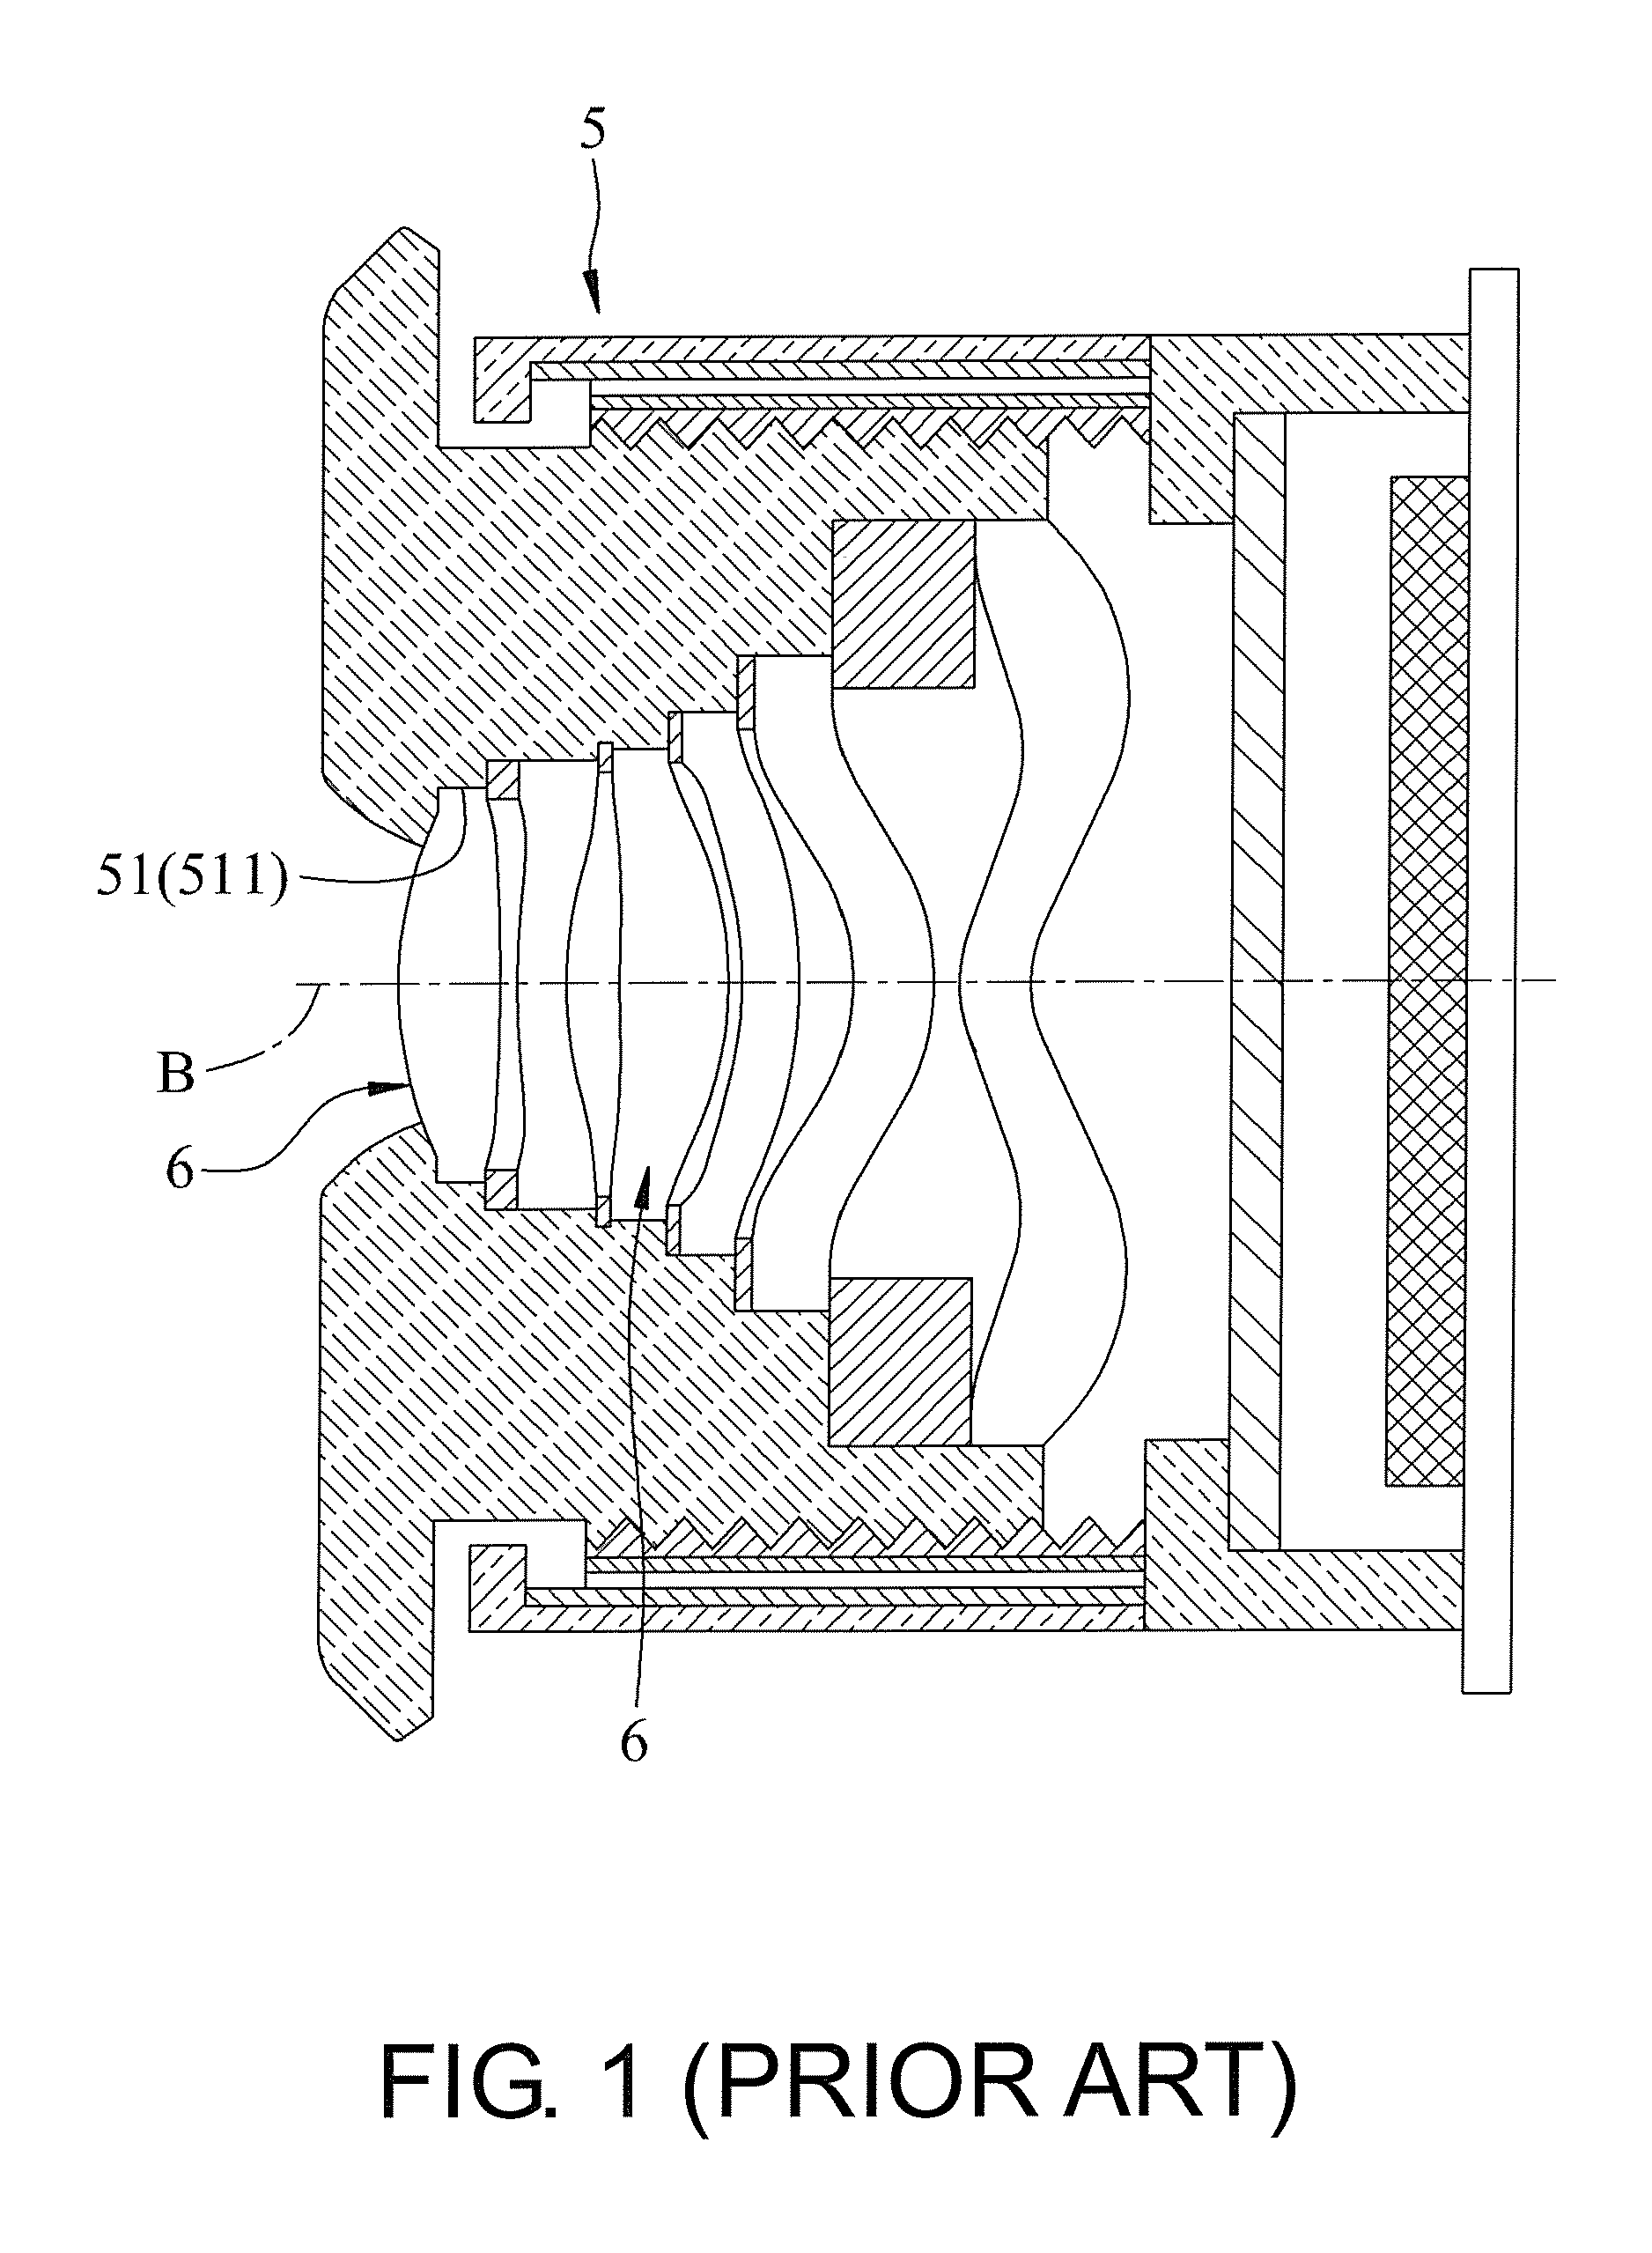 Optical imaging lens with a fixing structure